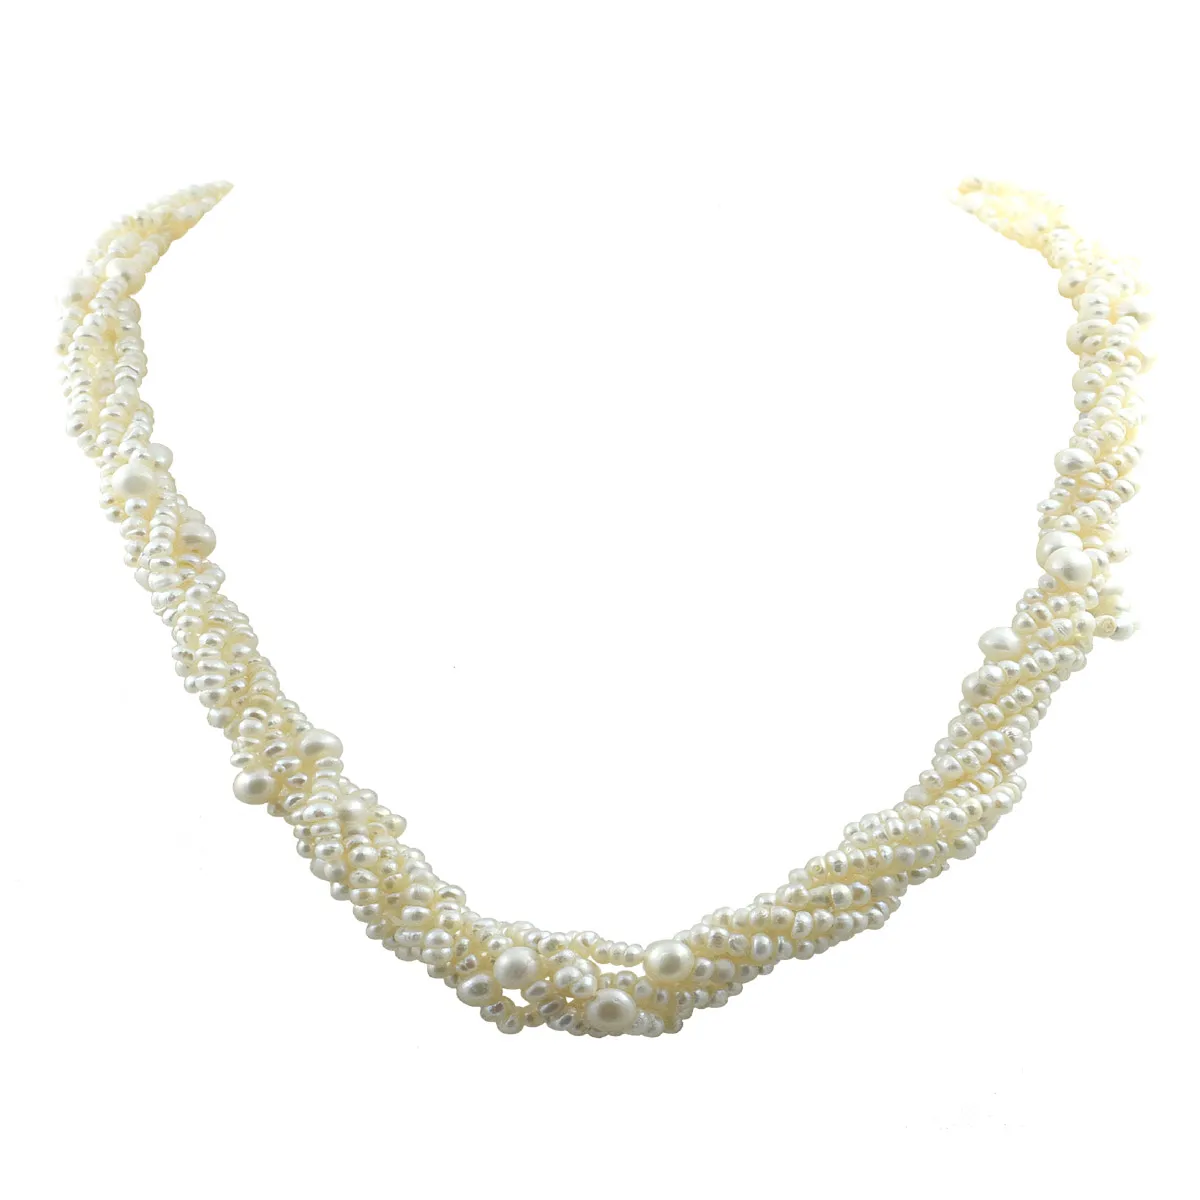 5 Line Twisted Real Freshwater Pearl Necklace for Women (SN1053)